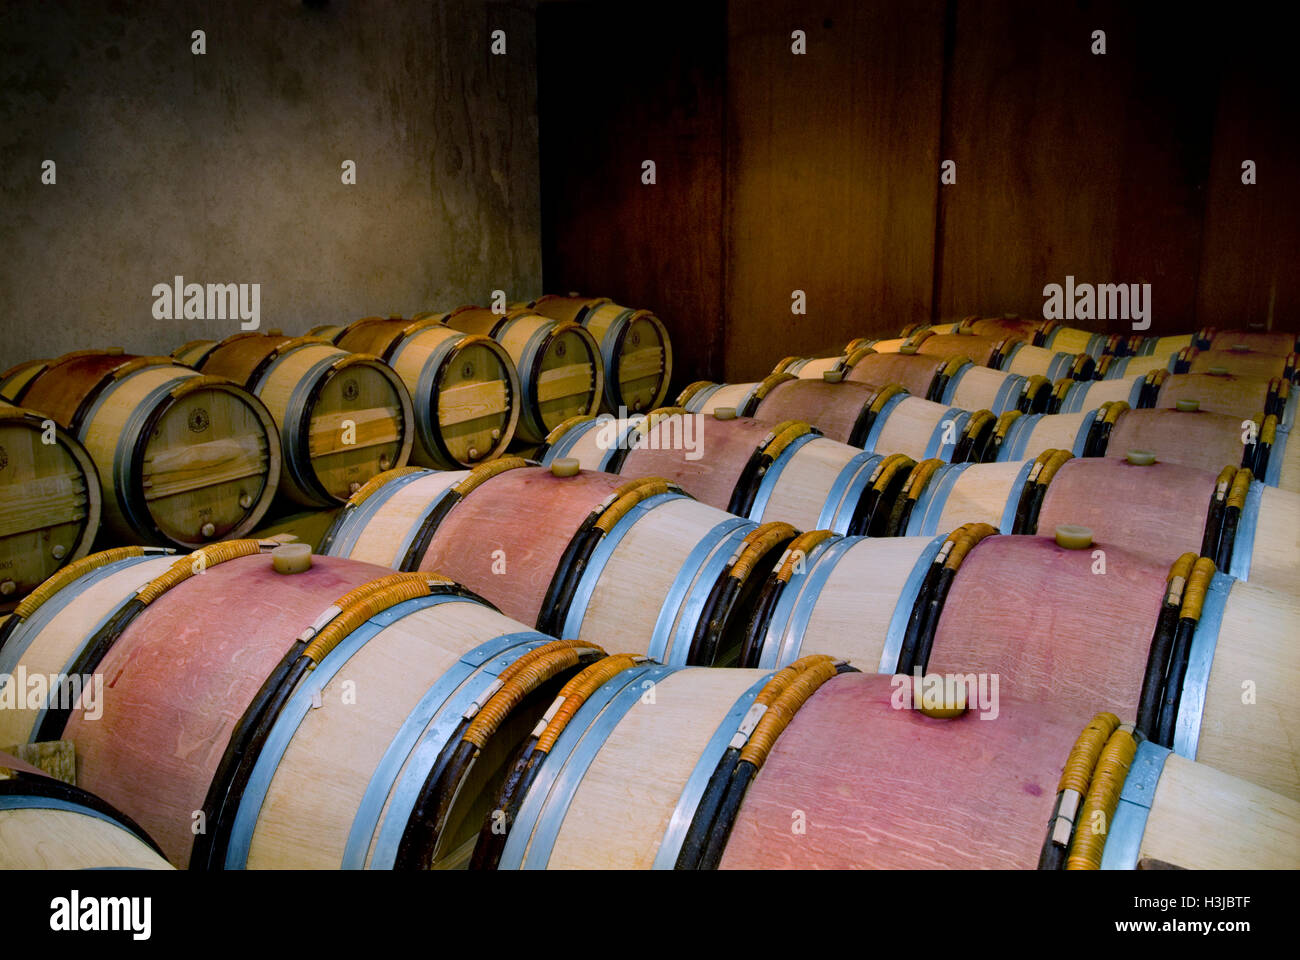 The barrel cellar at rare exclusive expensive Pomerol wine producer Chateau Le Pin Pomerol Gironde France Stock Photo